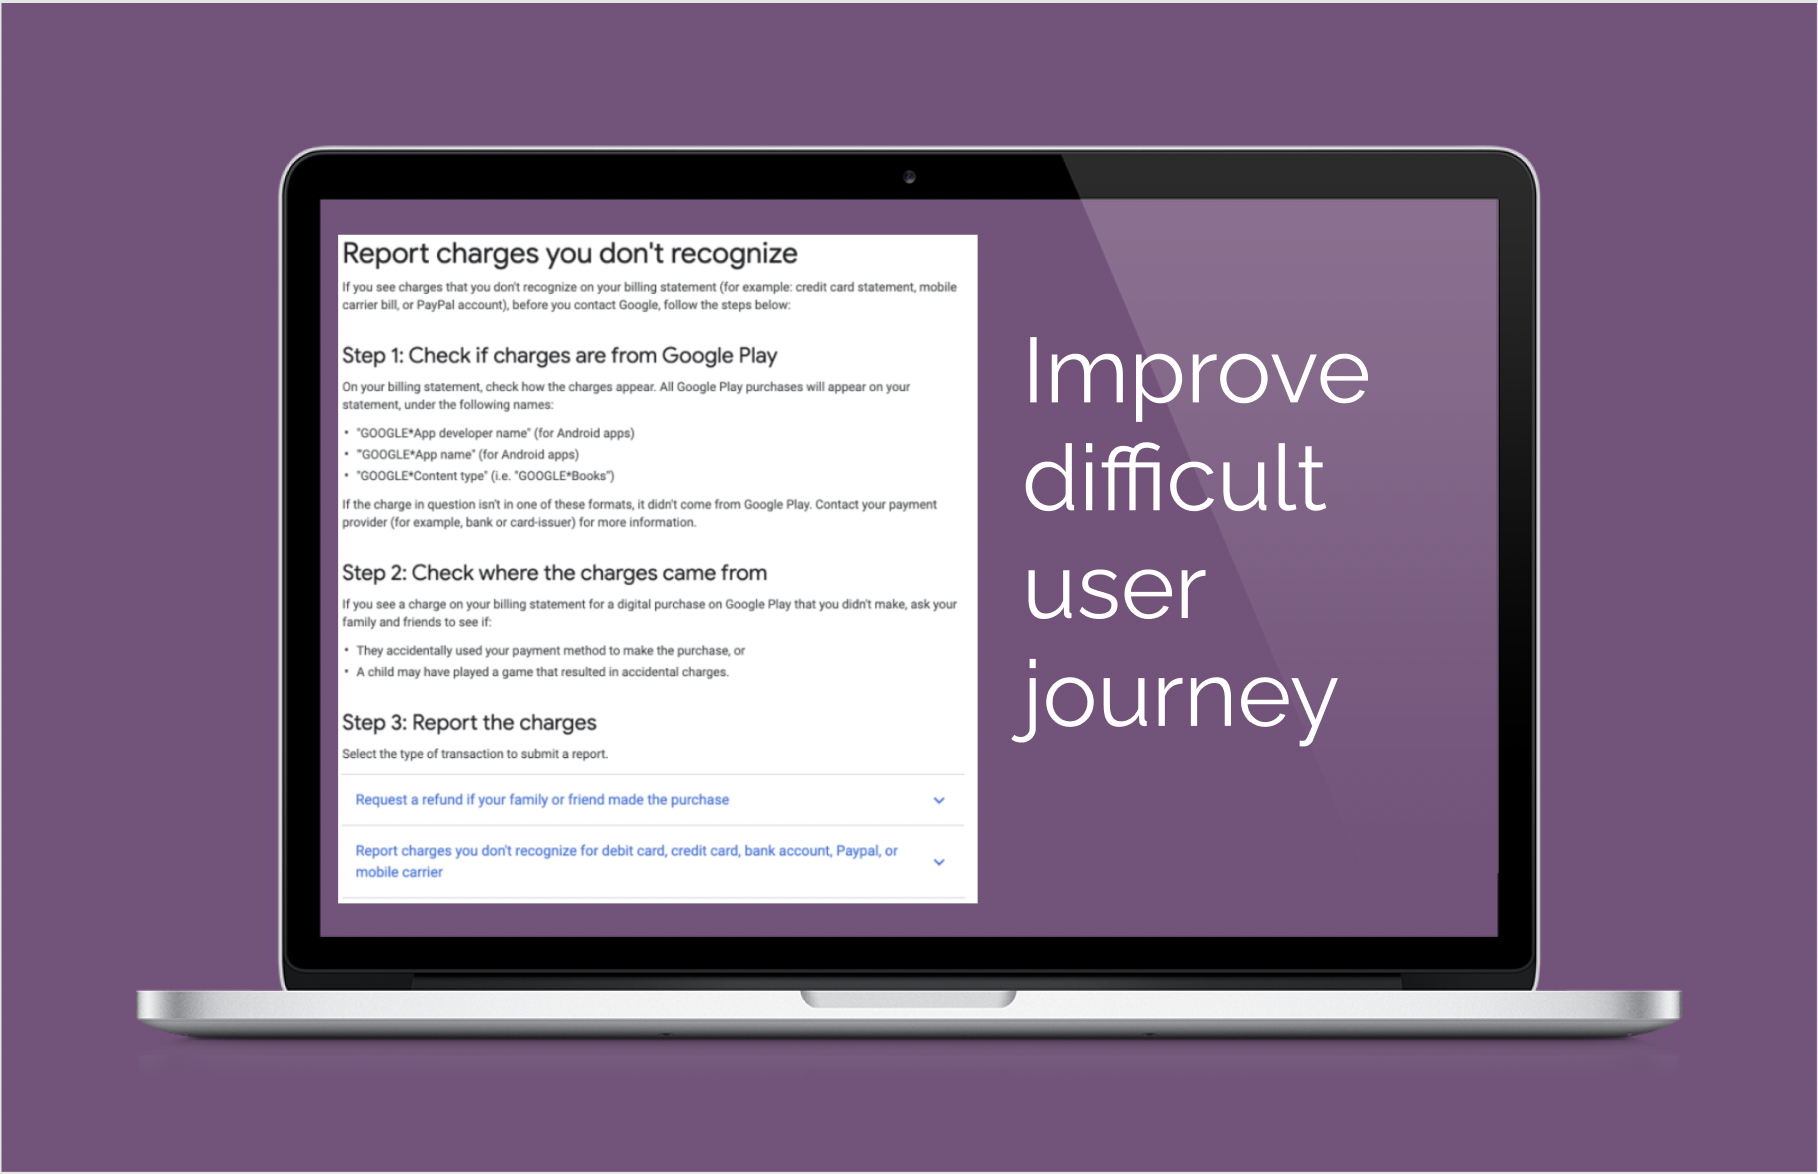 Improve user journey for unauthorized charges